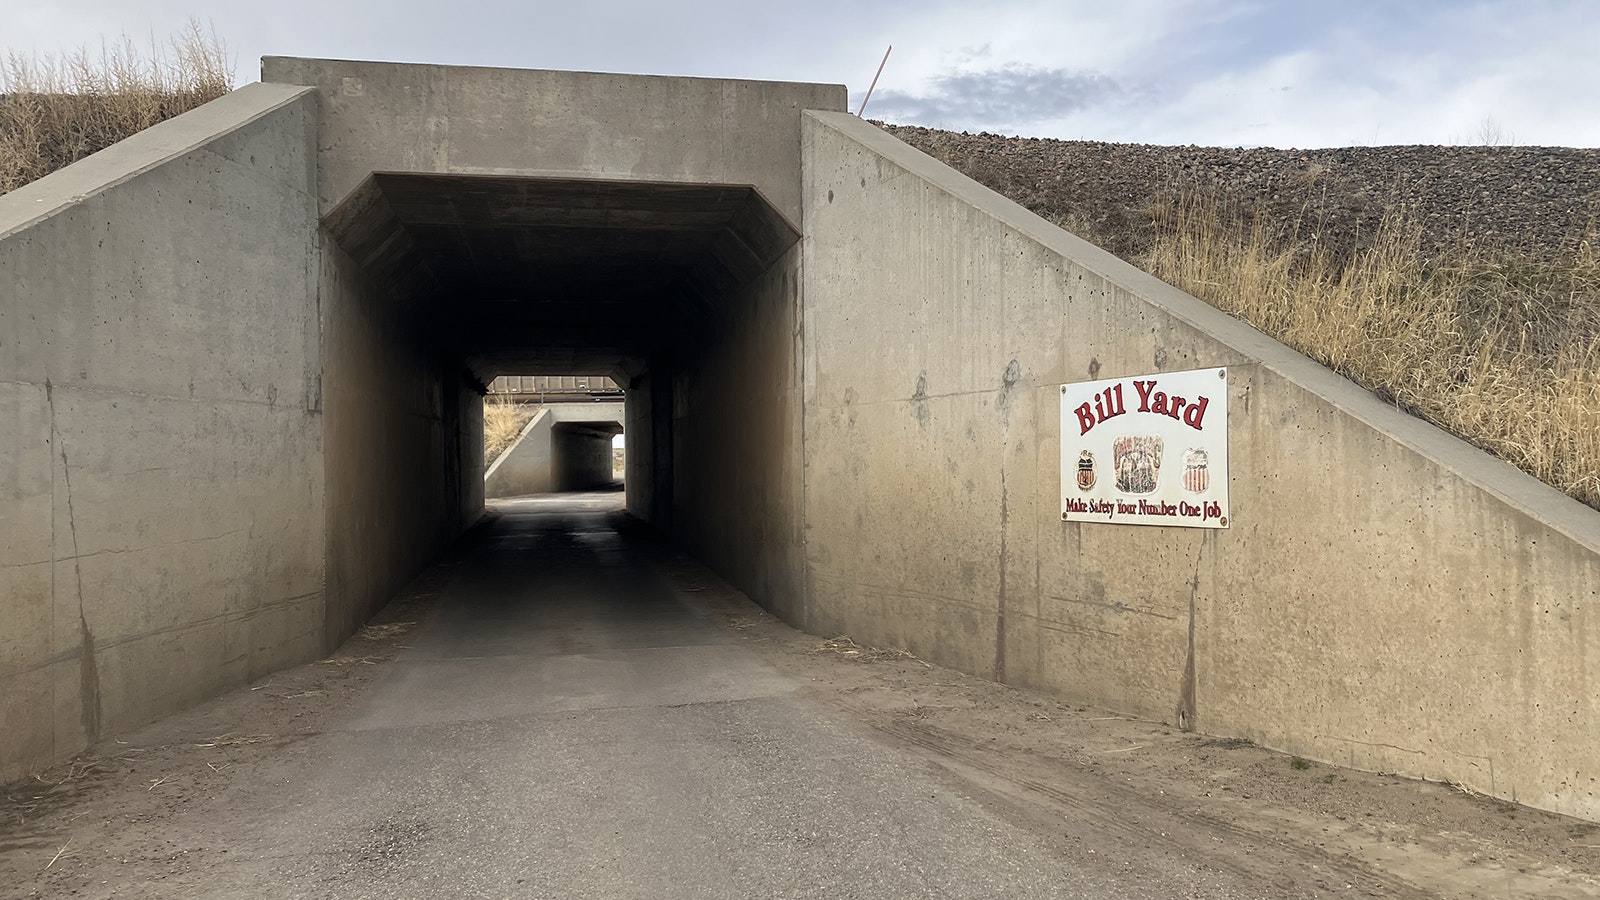 A Union Pacific Railroad yard facility in Bill is accessed by a narrow tunnel under the tracks. The railroad worked with Avantic Lodging Enterprises in 2007 to provide a rest area for its crews and a hotel and diner were built.